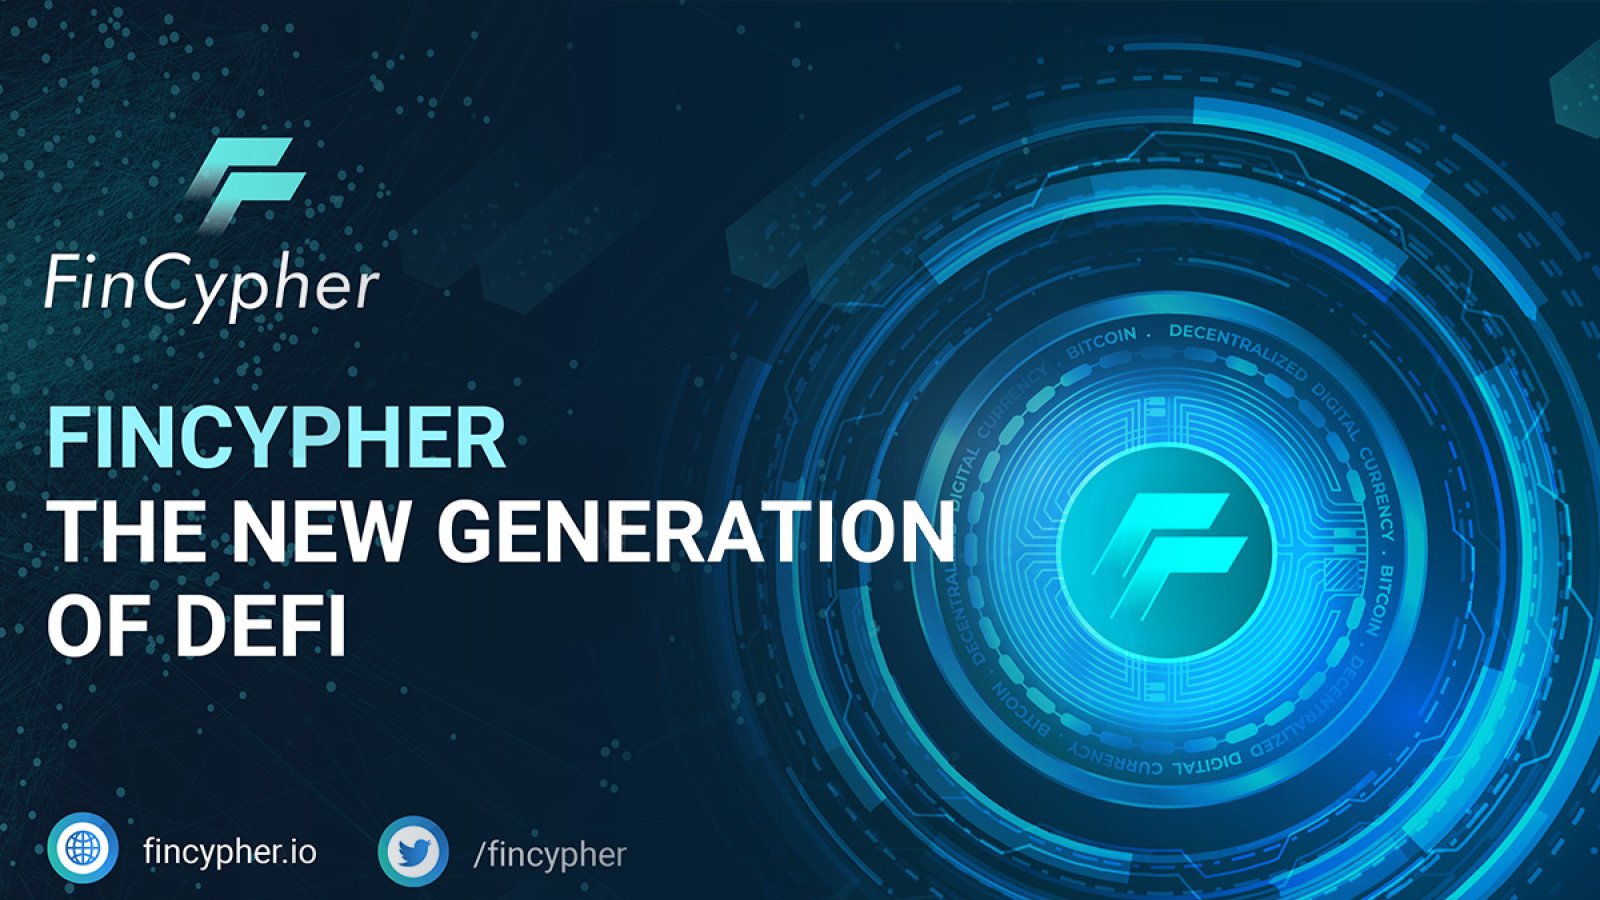 FinCypher - The New Generation of DeFi